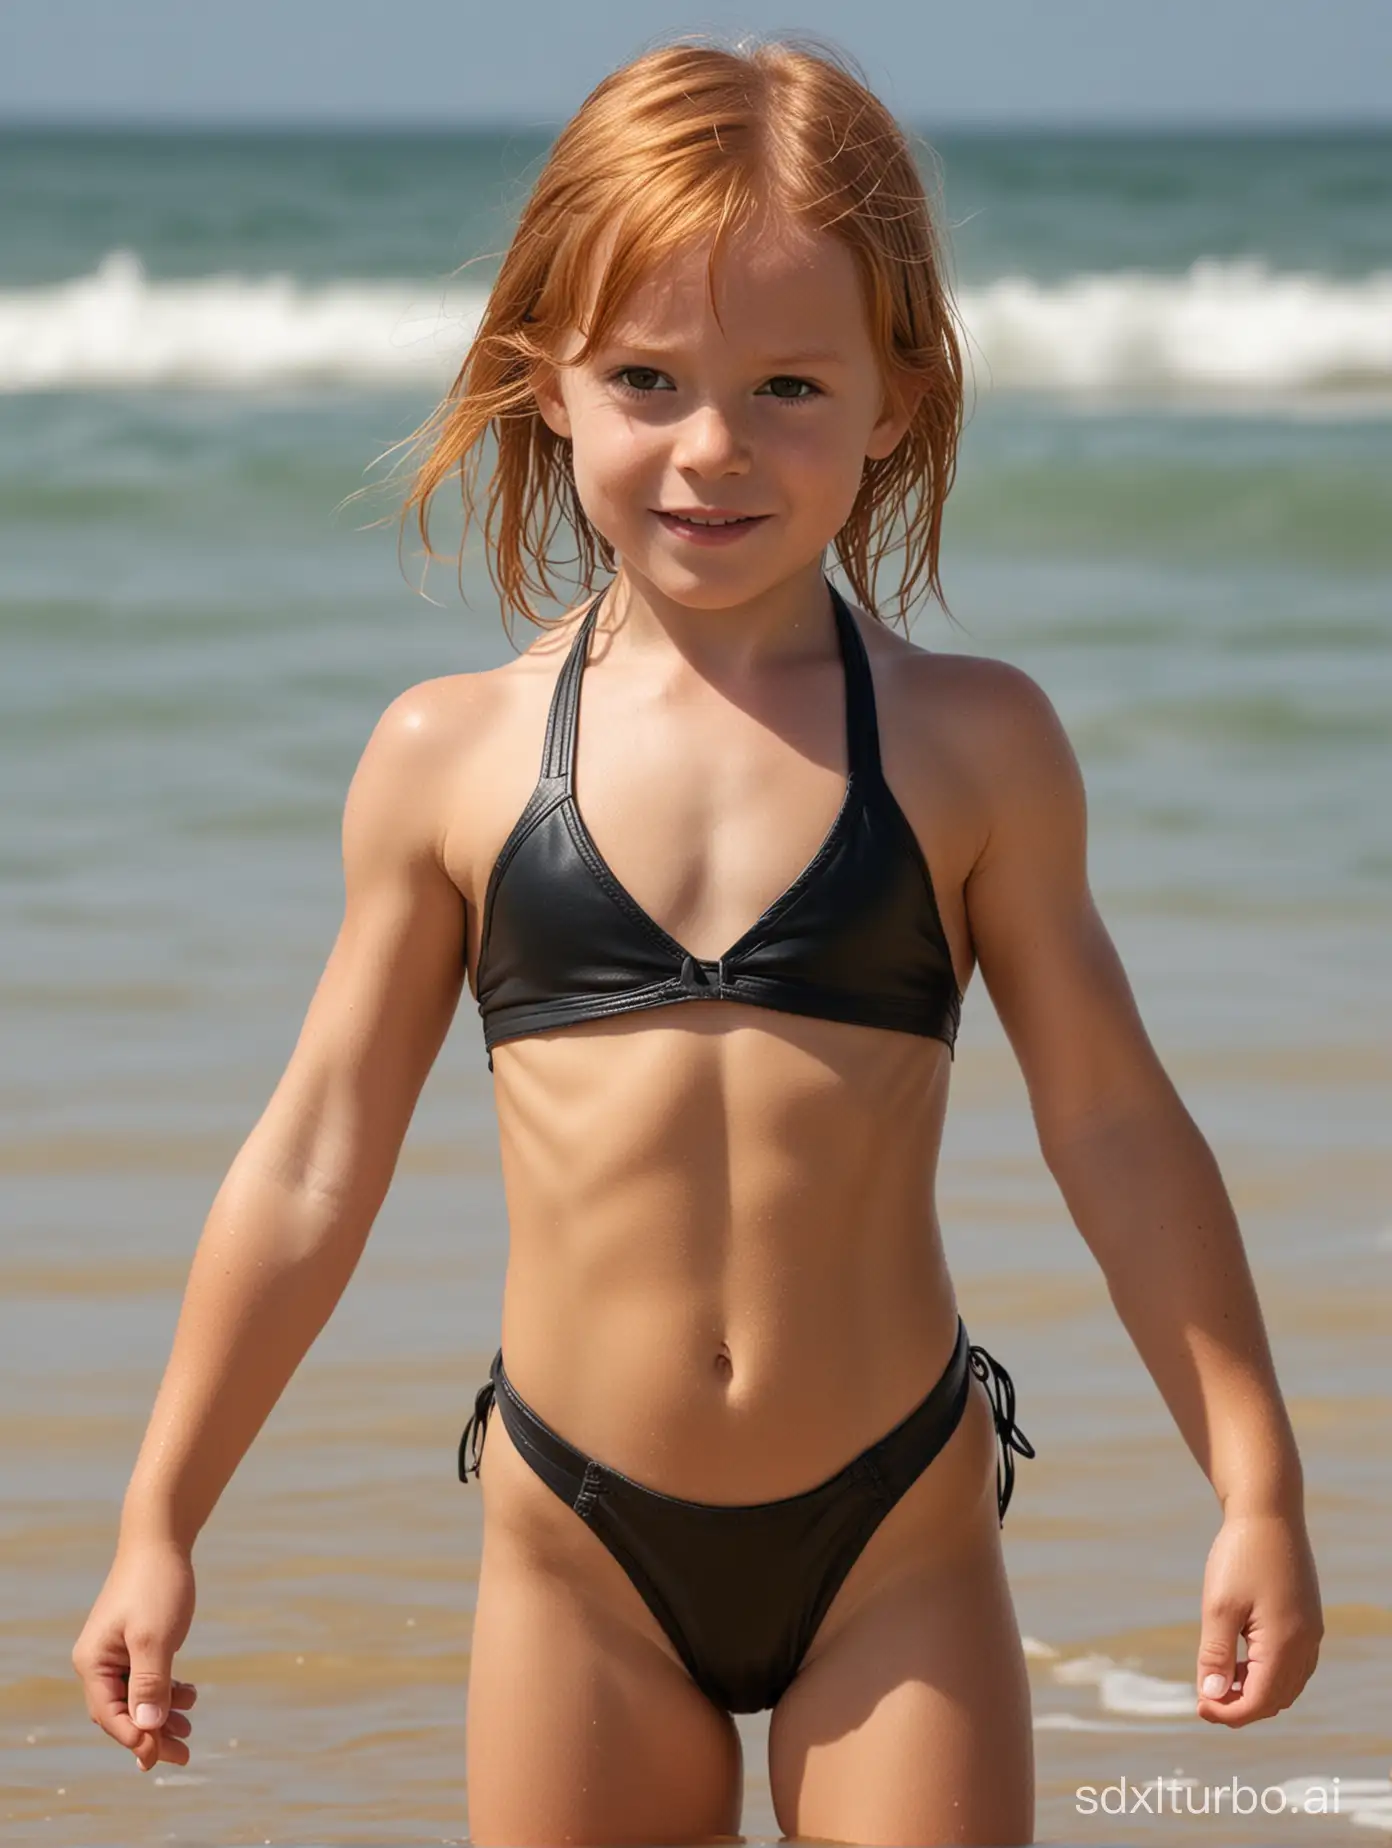 Muscular-6YearOld-GingerHaired-Girl-in-Leather-Bathing-Suit-at-Odessa-Beach